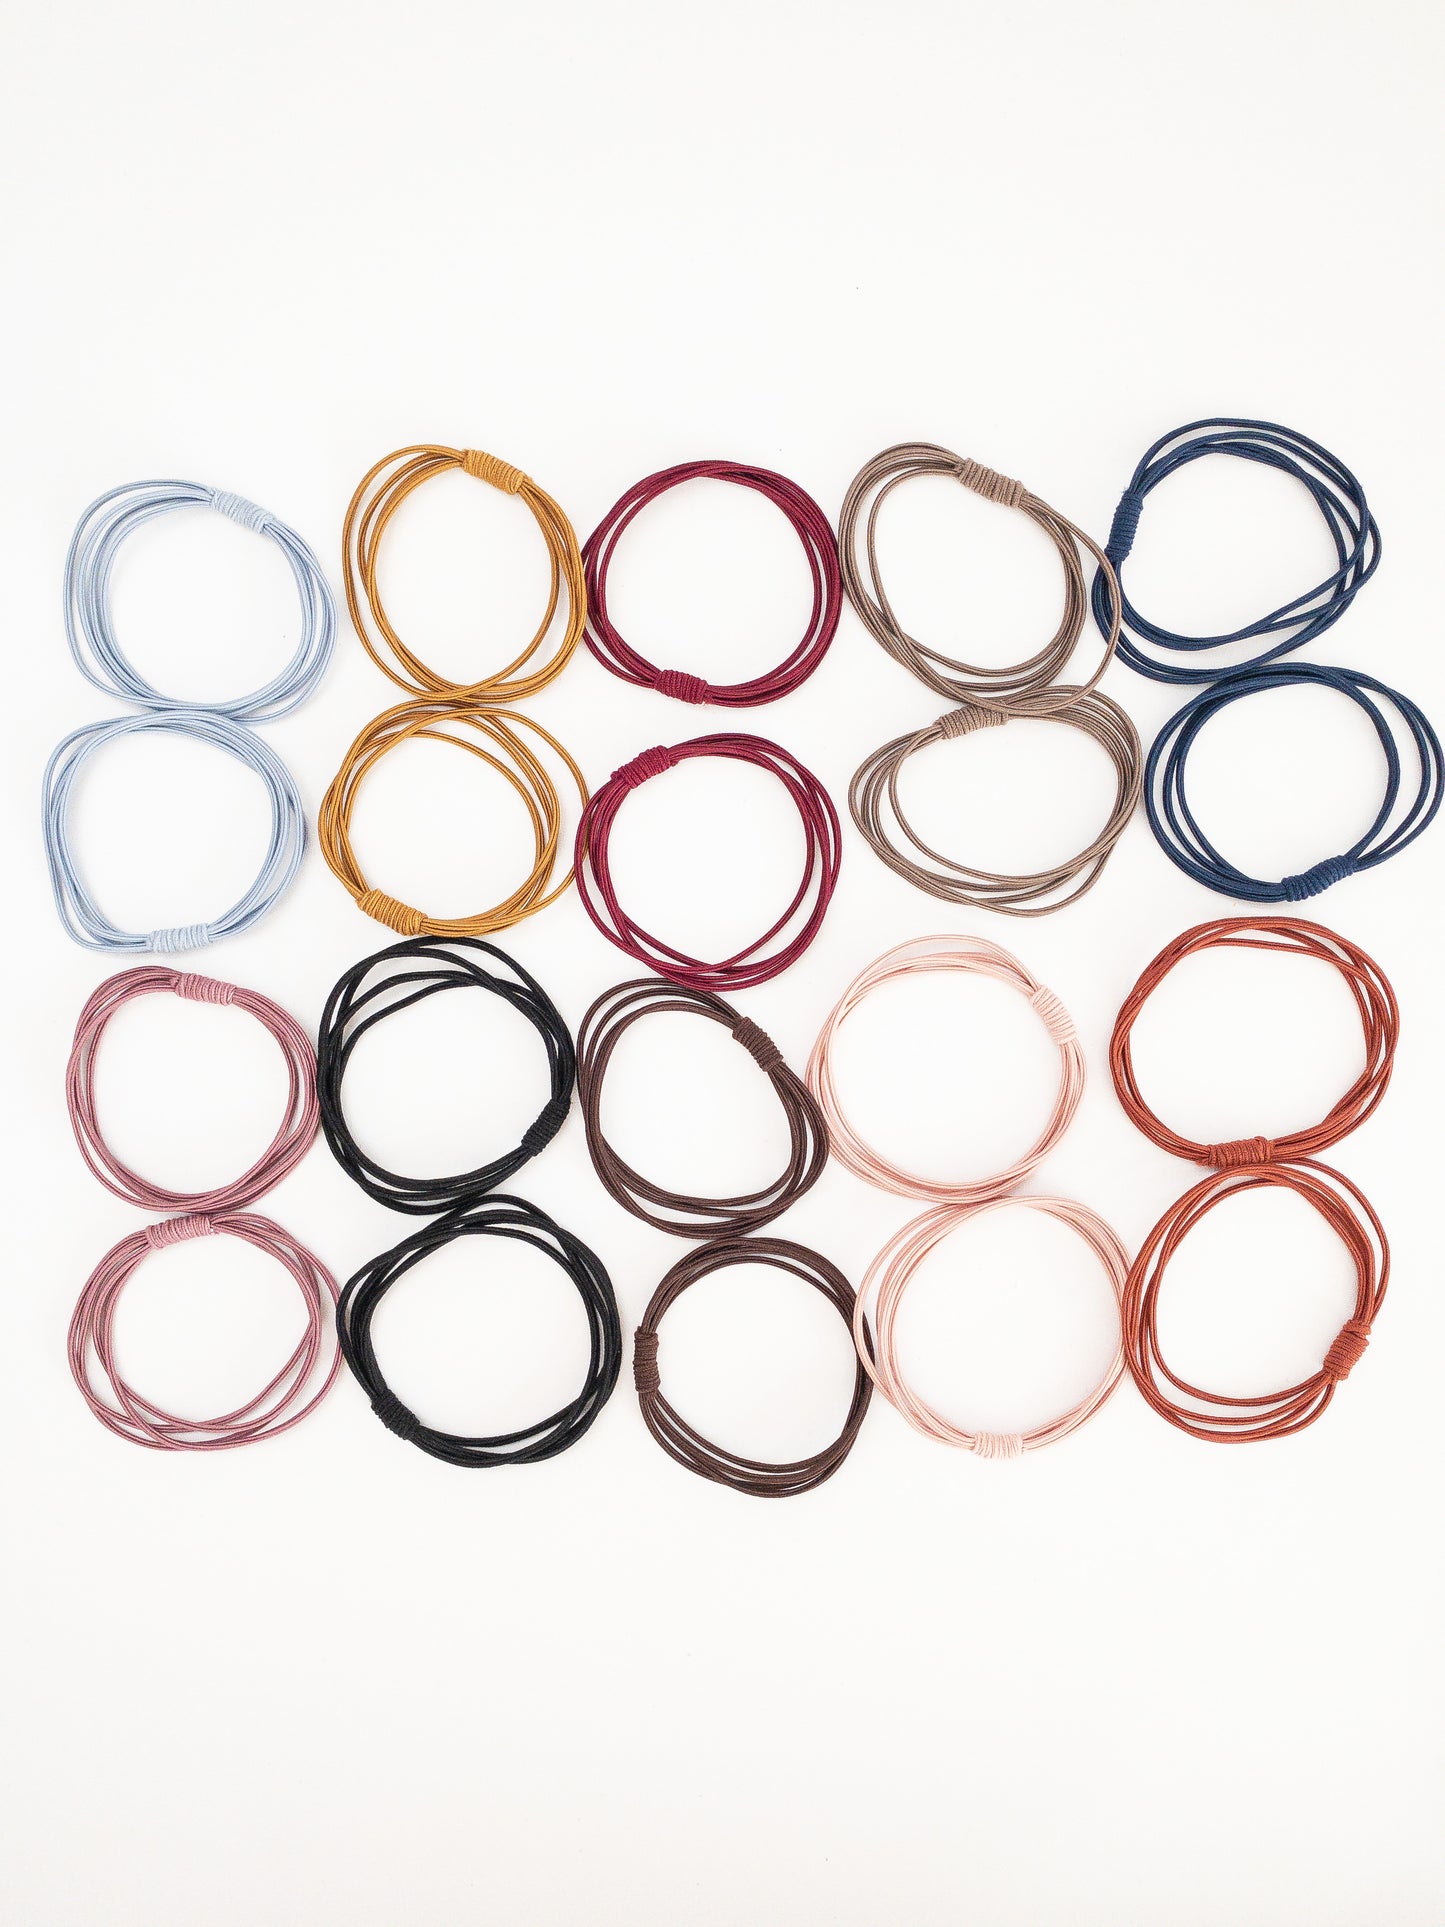 A much needed set of 20 hair ties! Each hair tie has four strands wrapped around and tied with a pretty coil. There are two of each color: black, plum, mustard, light pink, navy, dark brown, mauve, light blue, gray, and copper. Korean hair ties, Korean hair accessories, Korean accessories, Korean hair rubber bands